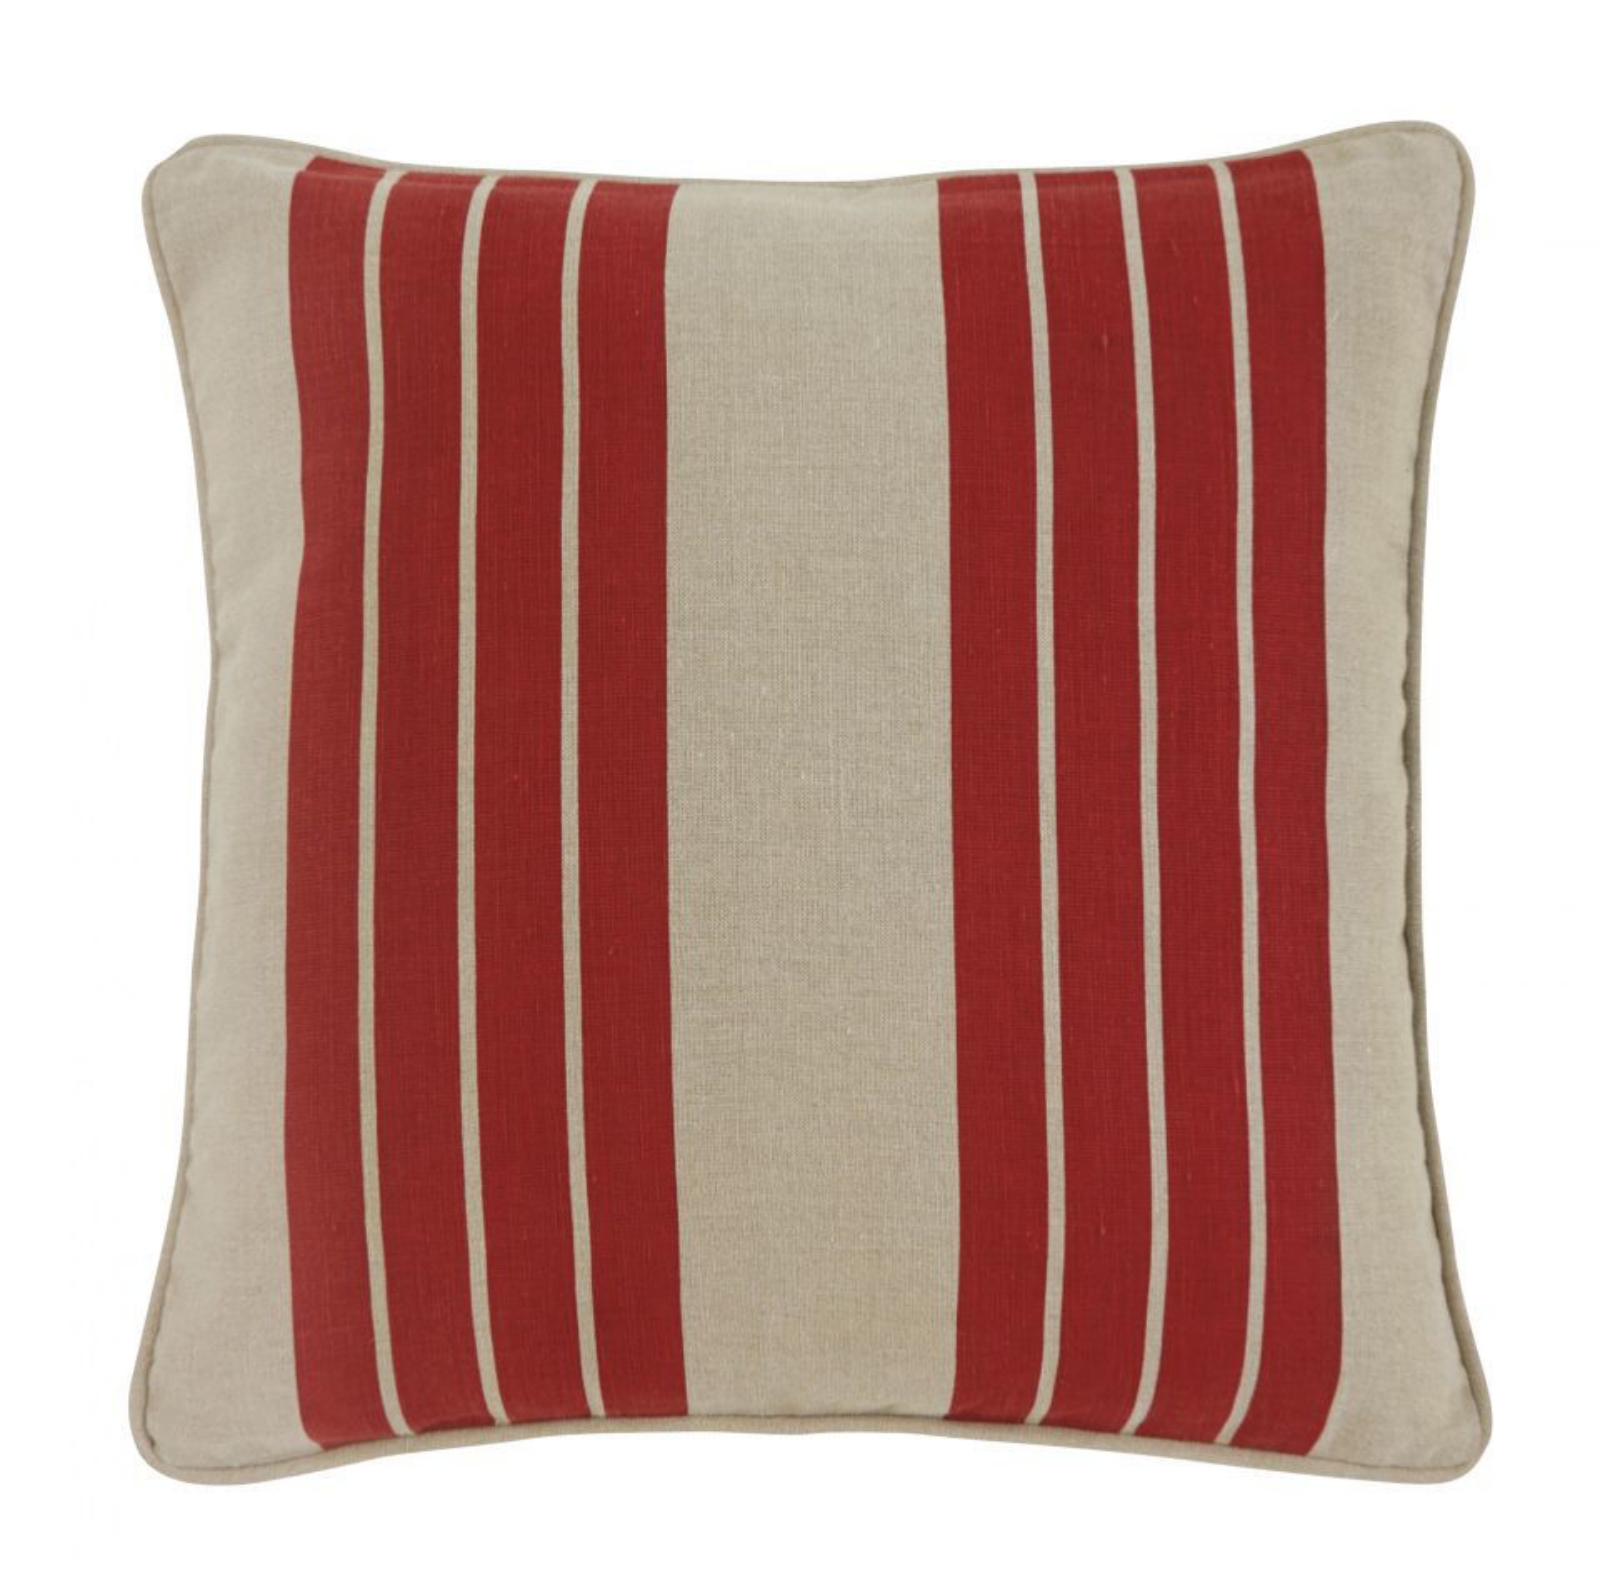 Picture of Striped Accent Pillow Cover